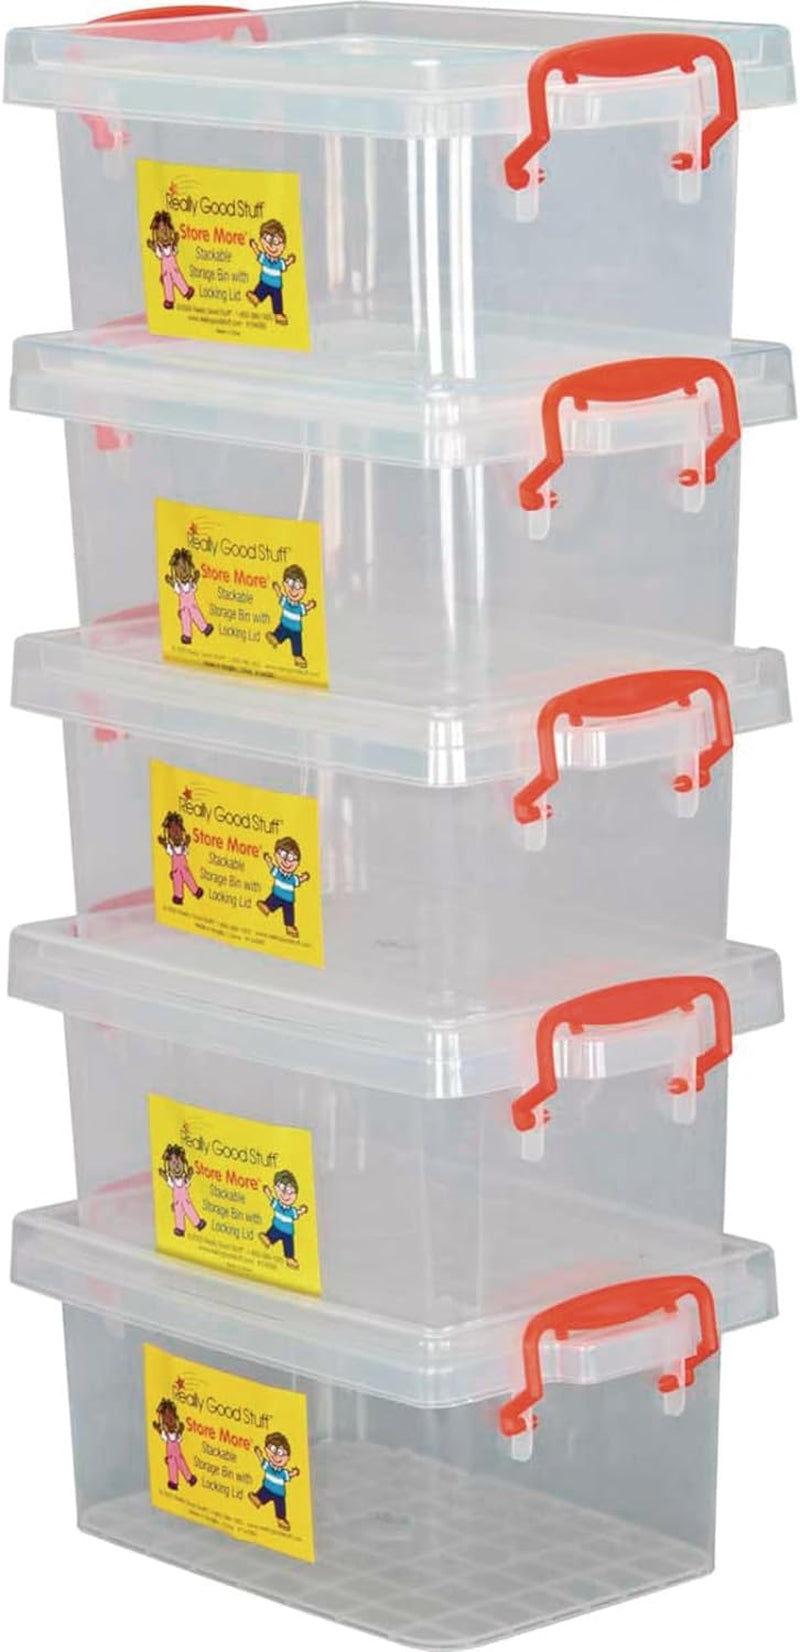 Small Clear Plastic Stackable Storage Tubs with Locking Lid – Red Handles Lock Lid in Place – Hold Supplies, Manipulatives and More in Classroom or Home, 8”X4”X5” (Set of 5)